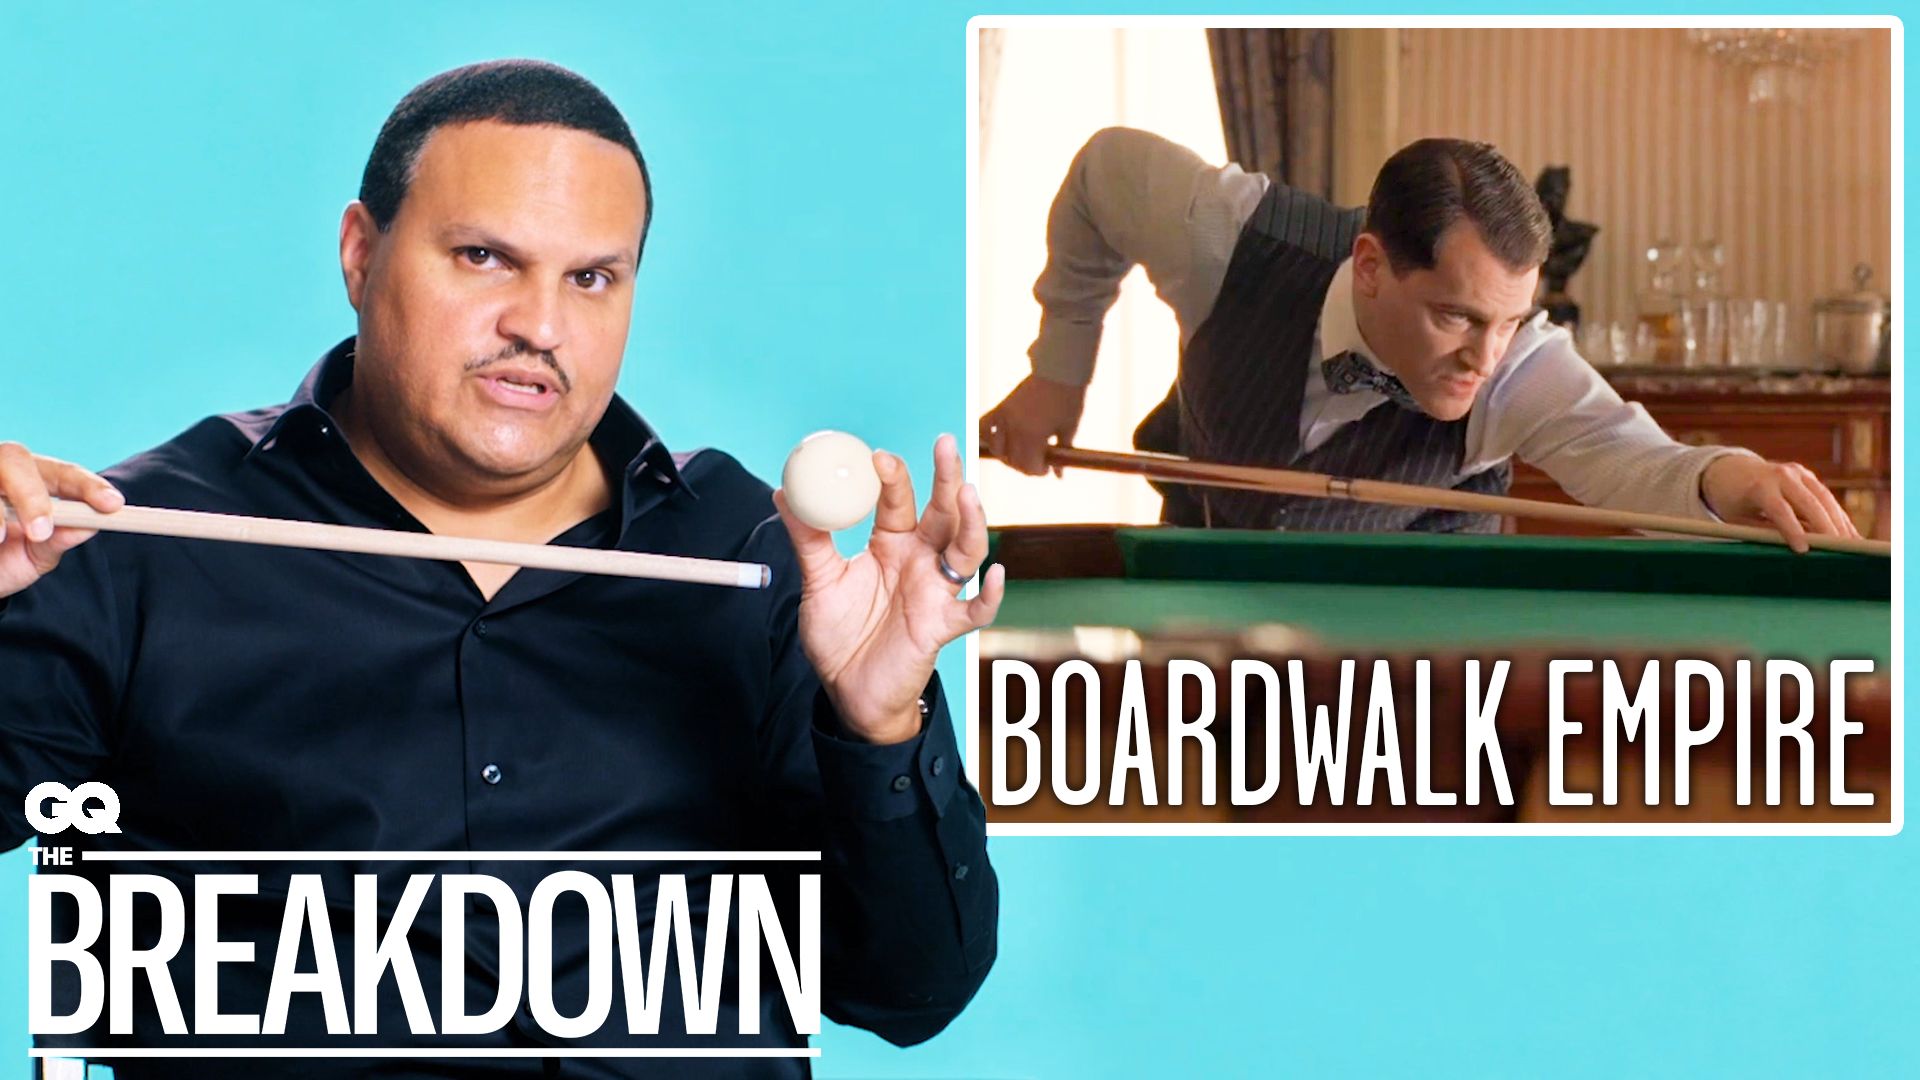 Watch Pro Pool Player Breaks Down Pool Scenes from Movies and TV The Breakdown GQ